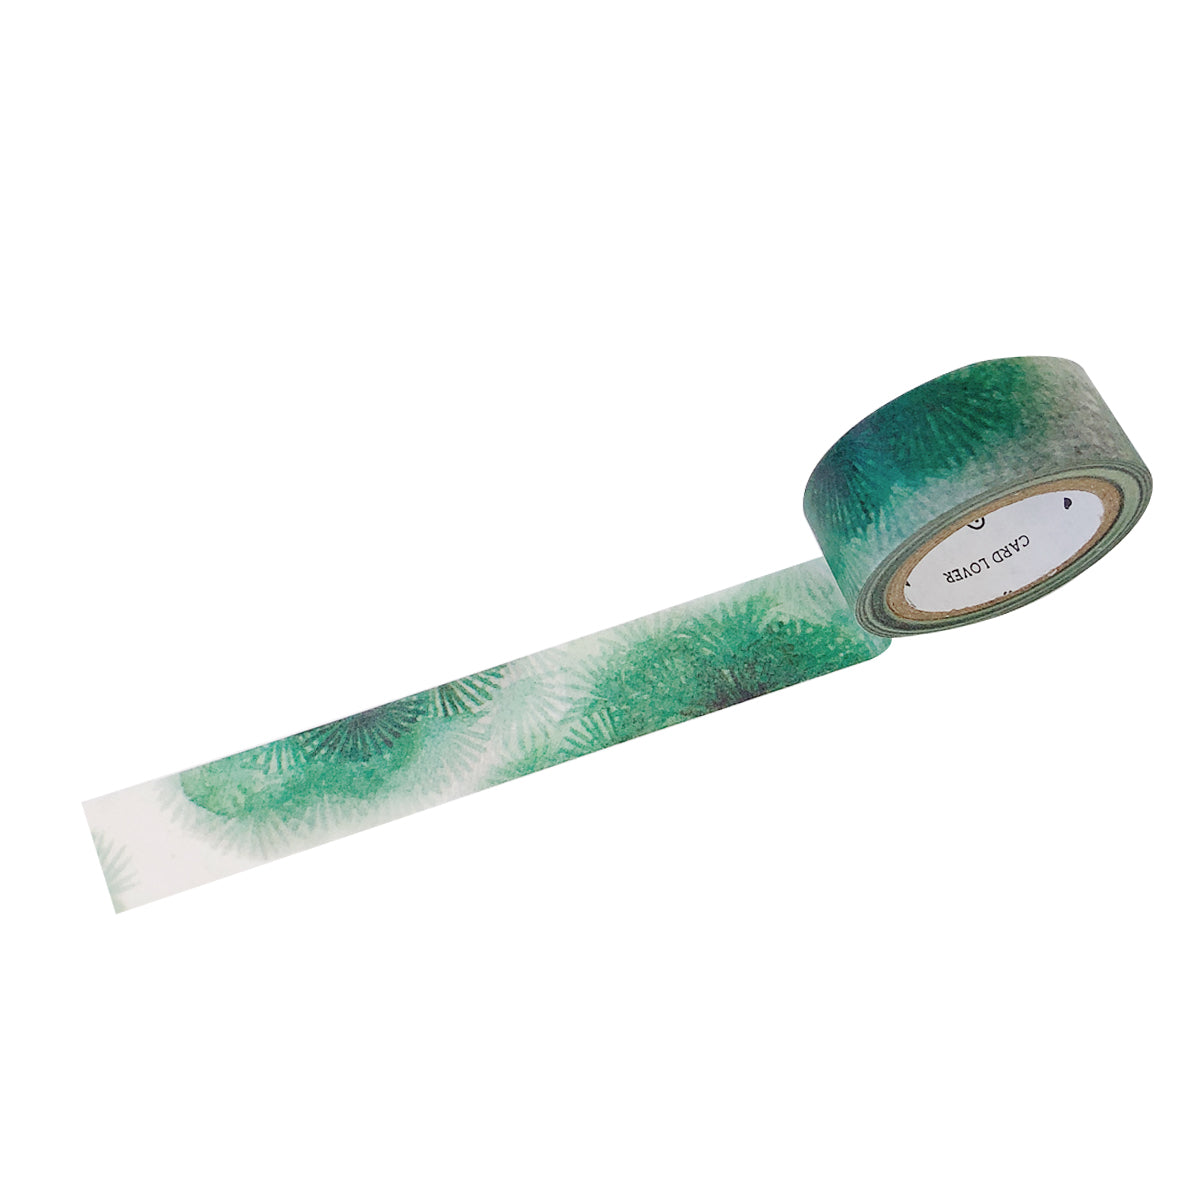 Wrapables Flowers and Greens Washi Masking Tape